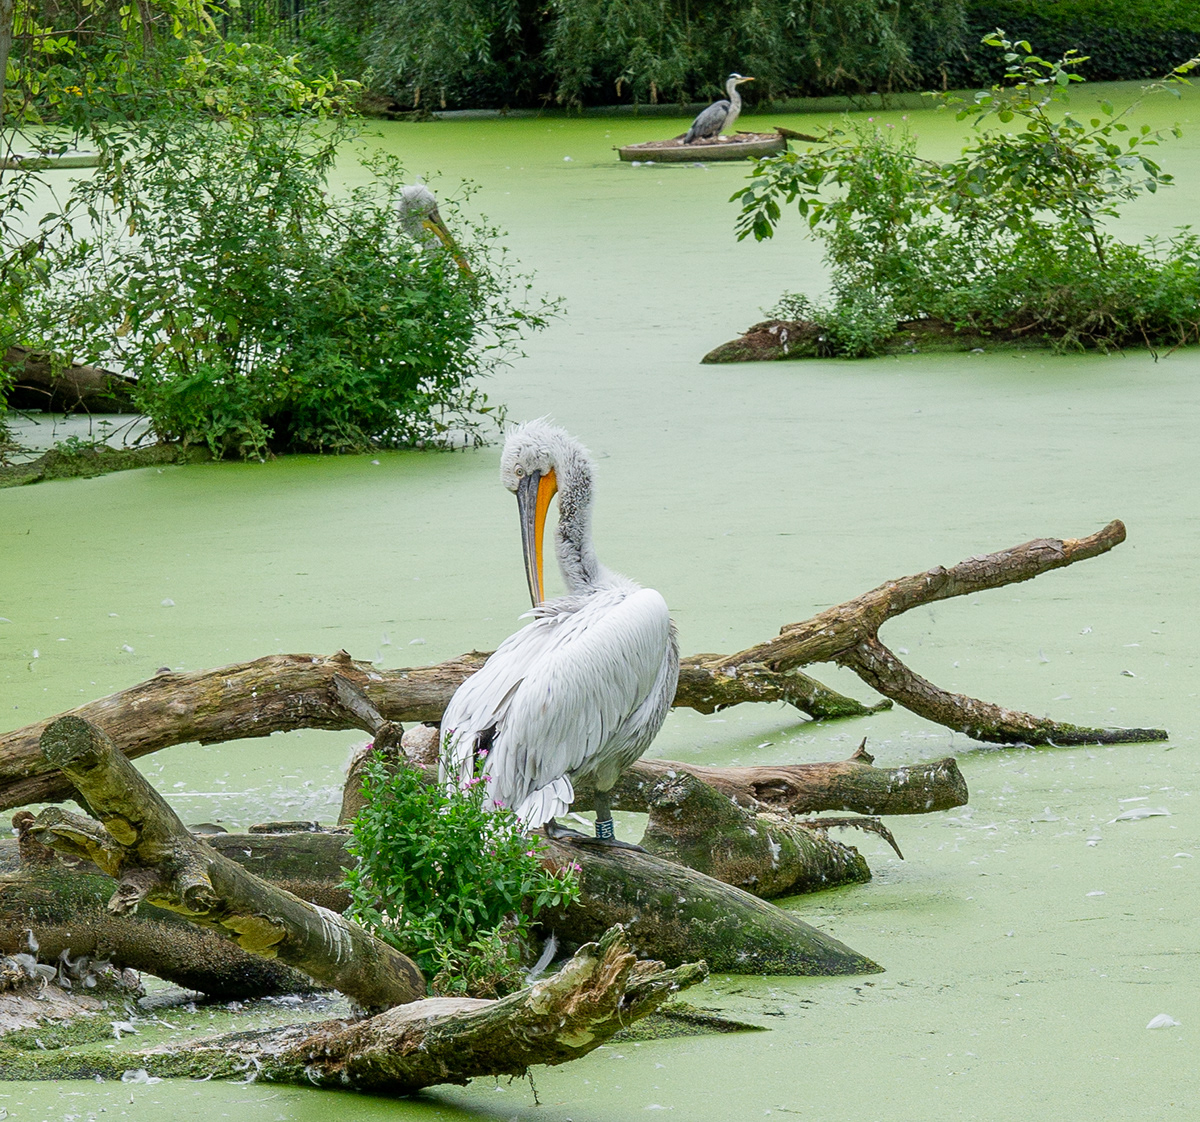 "Dalmatian pelicans: Majestic birds known for their striking appearance 